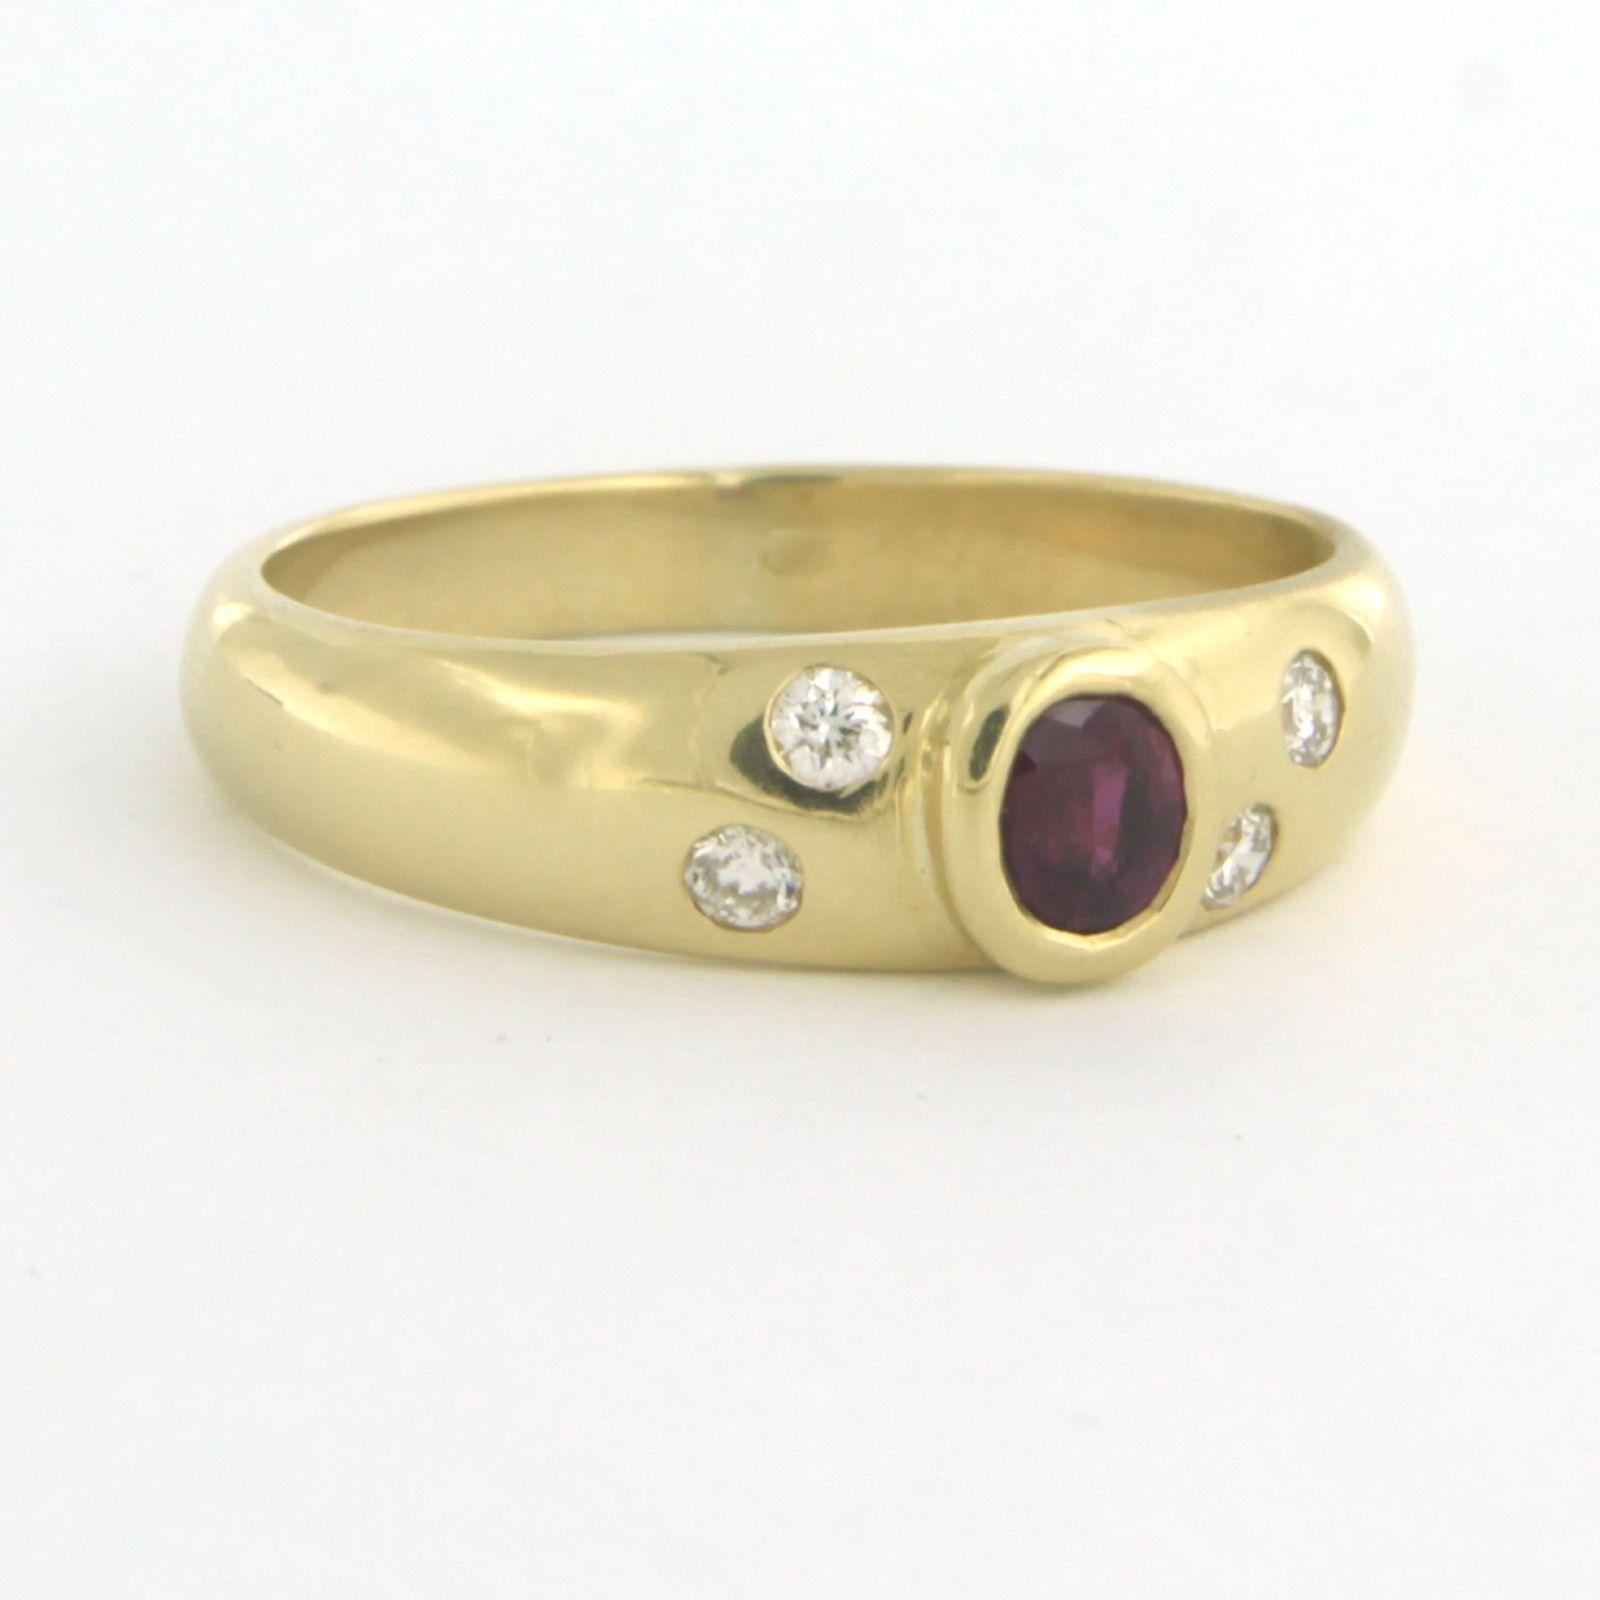 Modern Fashion ring set with ruby and diamonds 18k yellow gold